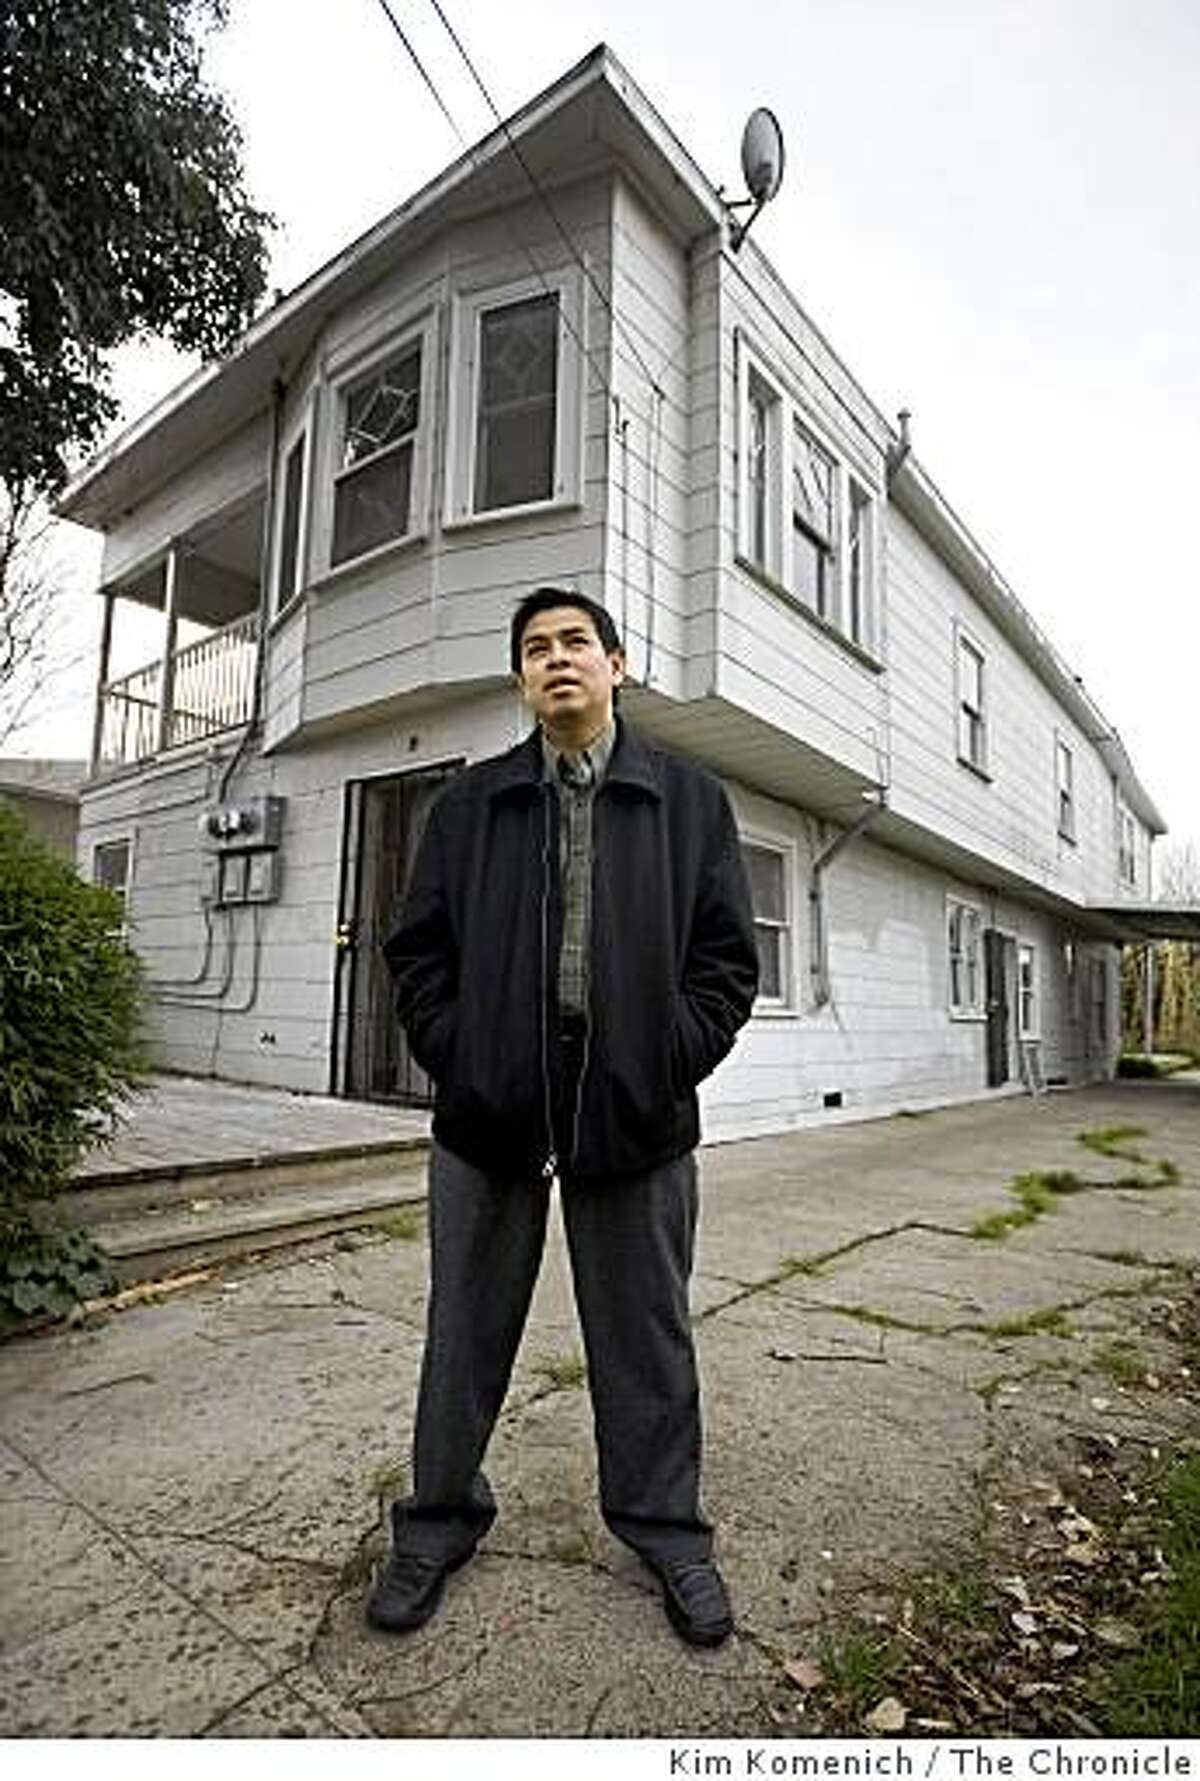 Real estate investor Chai Chanthapak stands outside the triplex he just bought in Oakland, Calif., on Tuesday, Jan. 20, 2009.